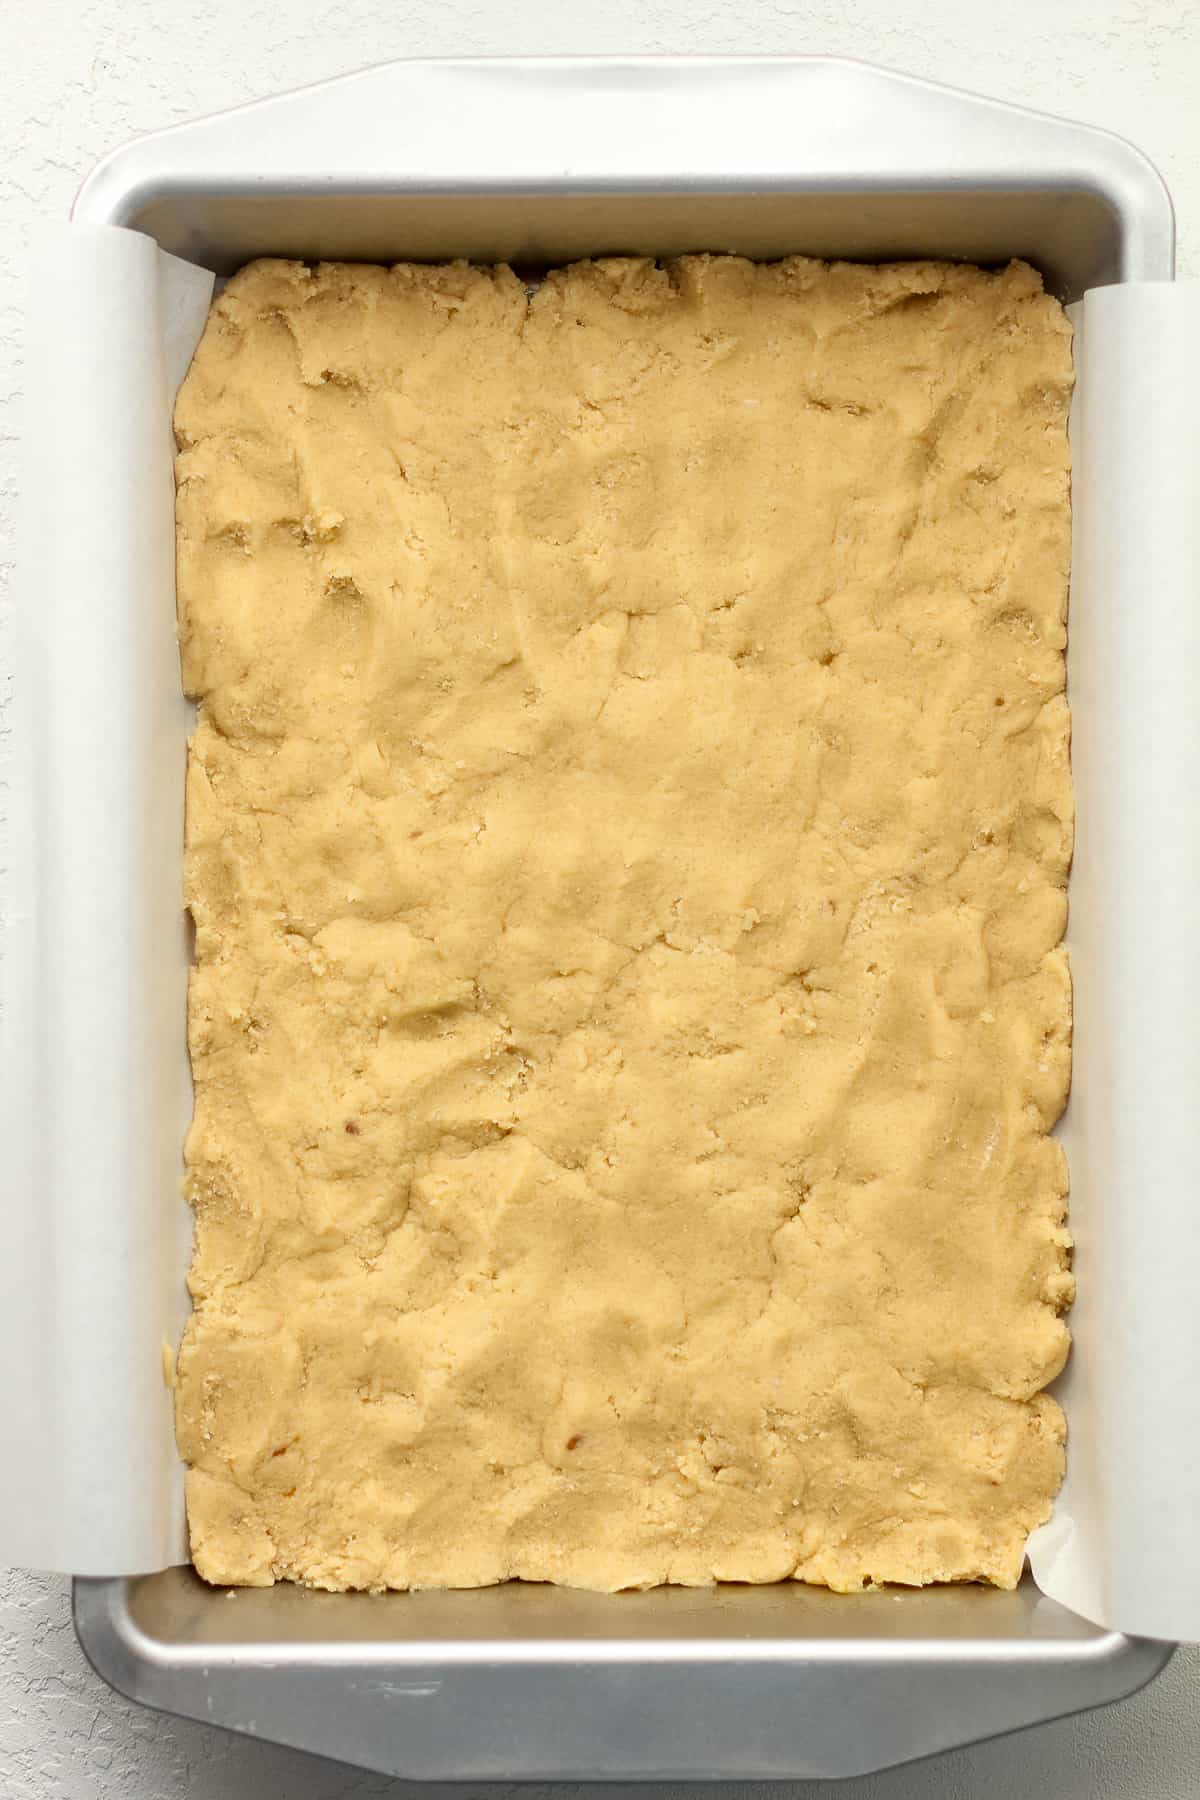 A pan of the blondie dough after pressing into the pan.